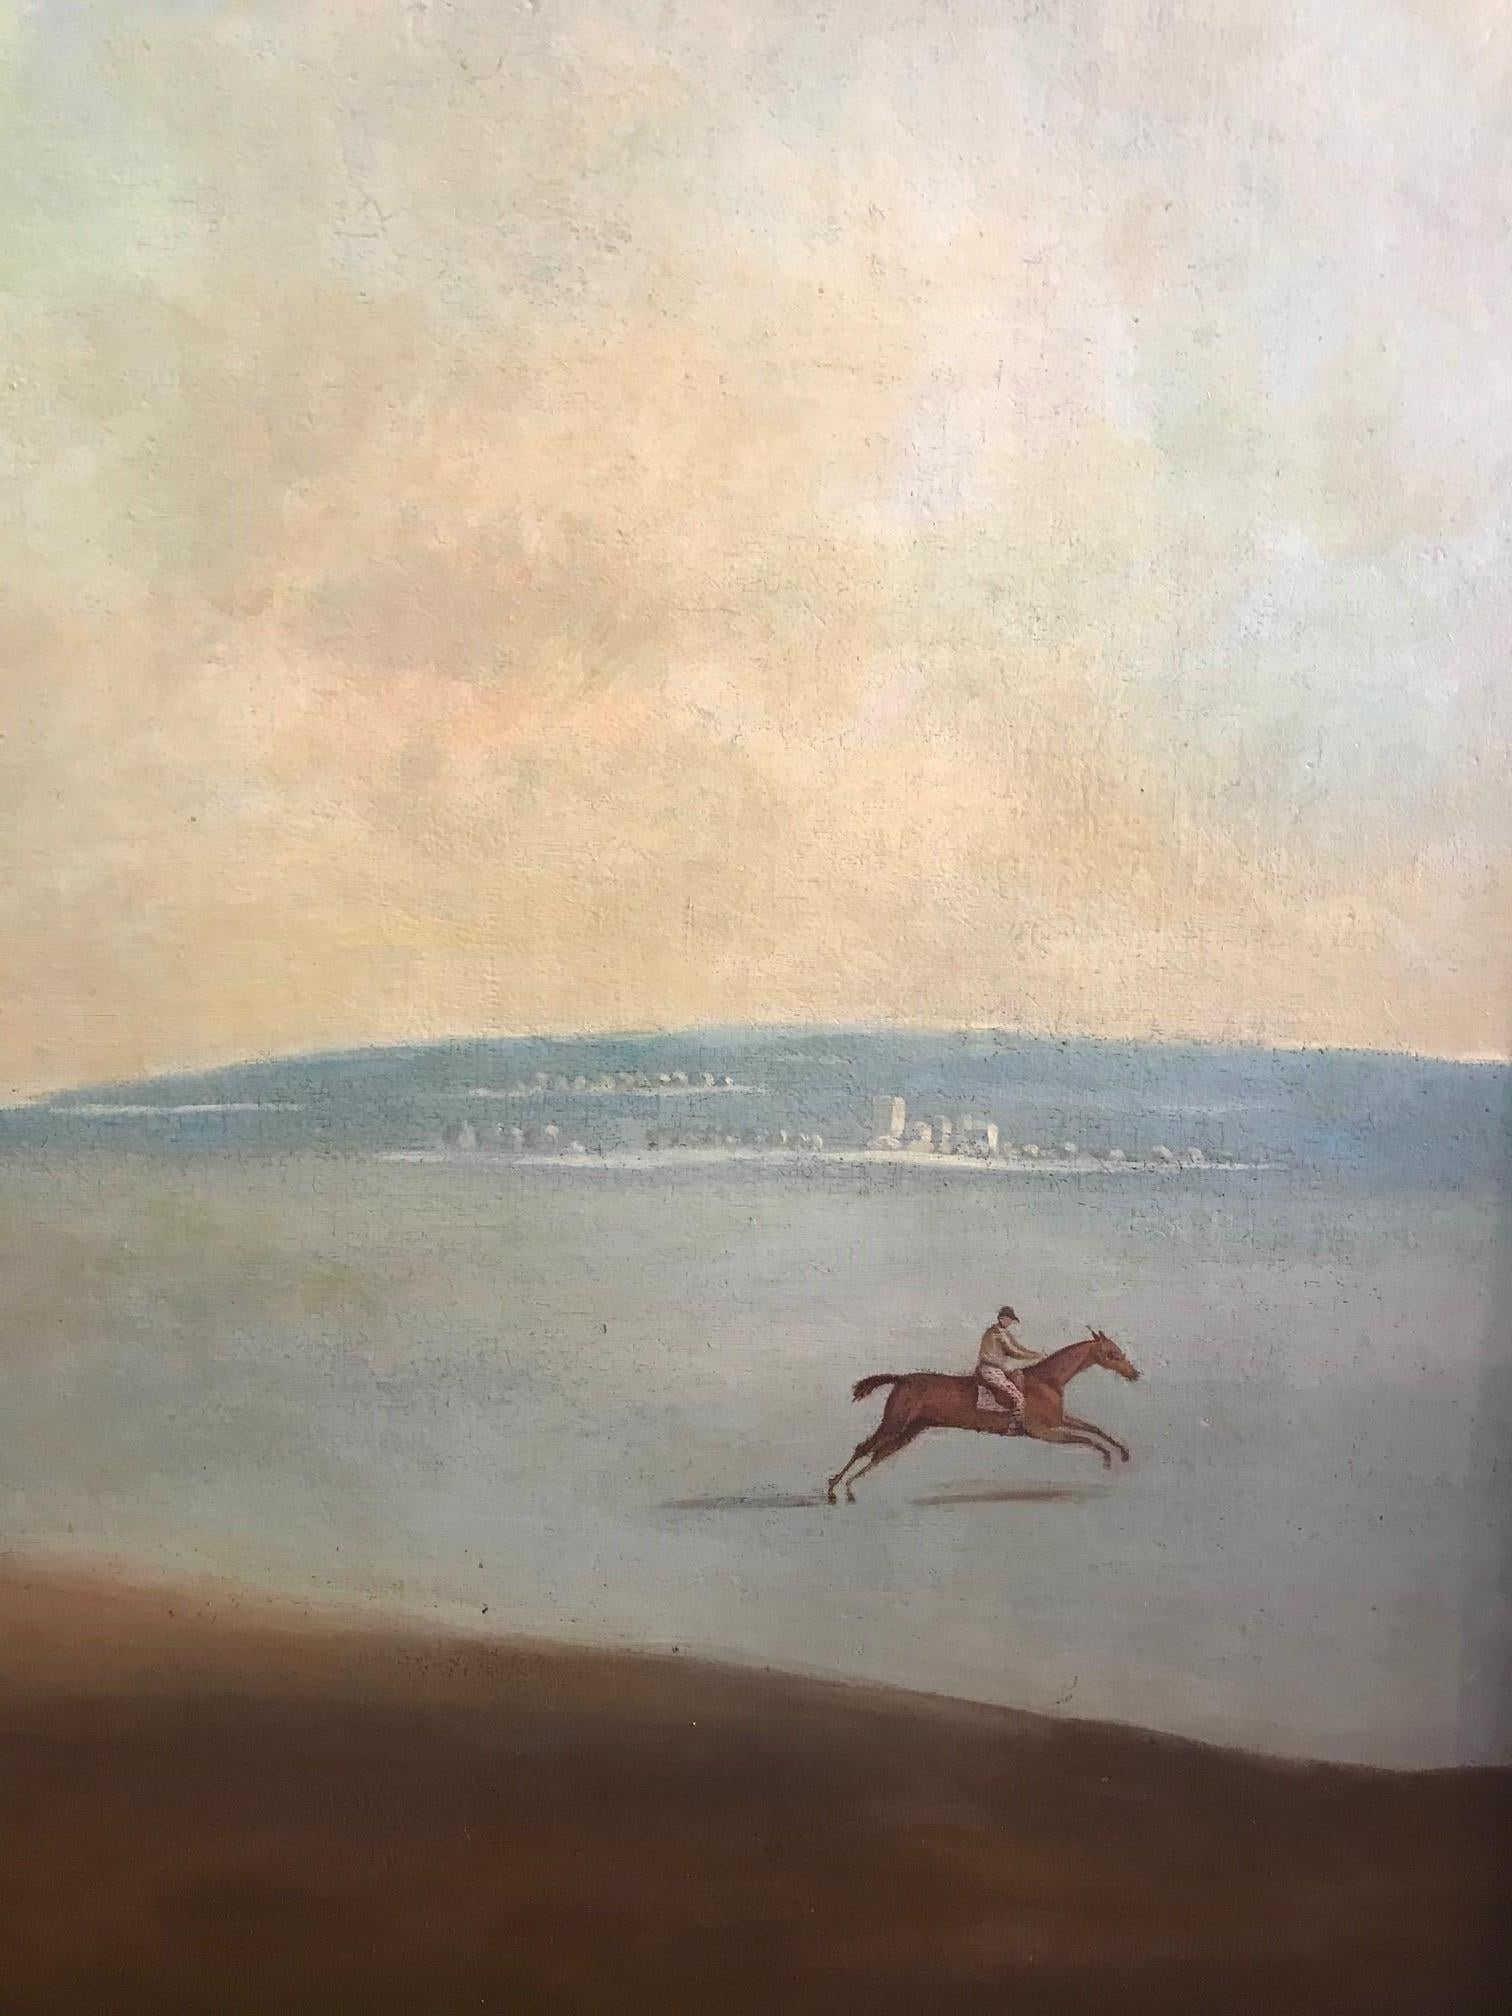 18th century horse paintings